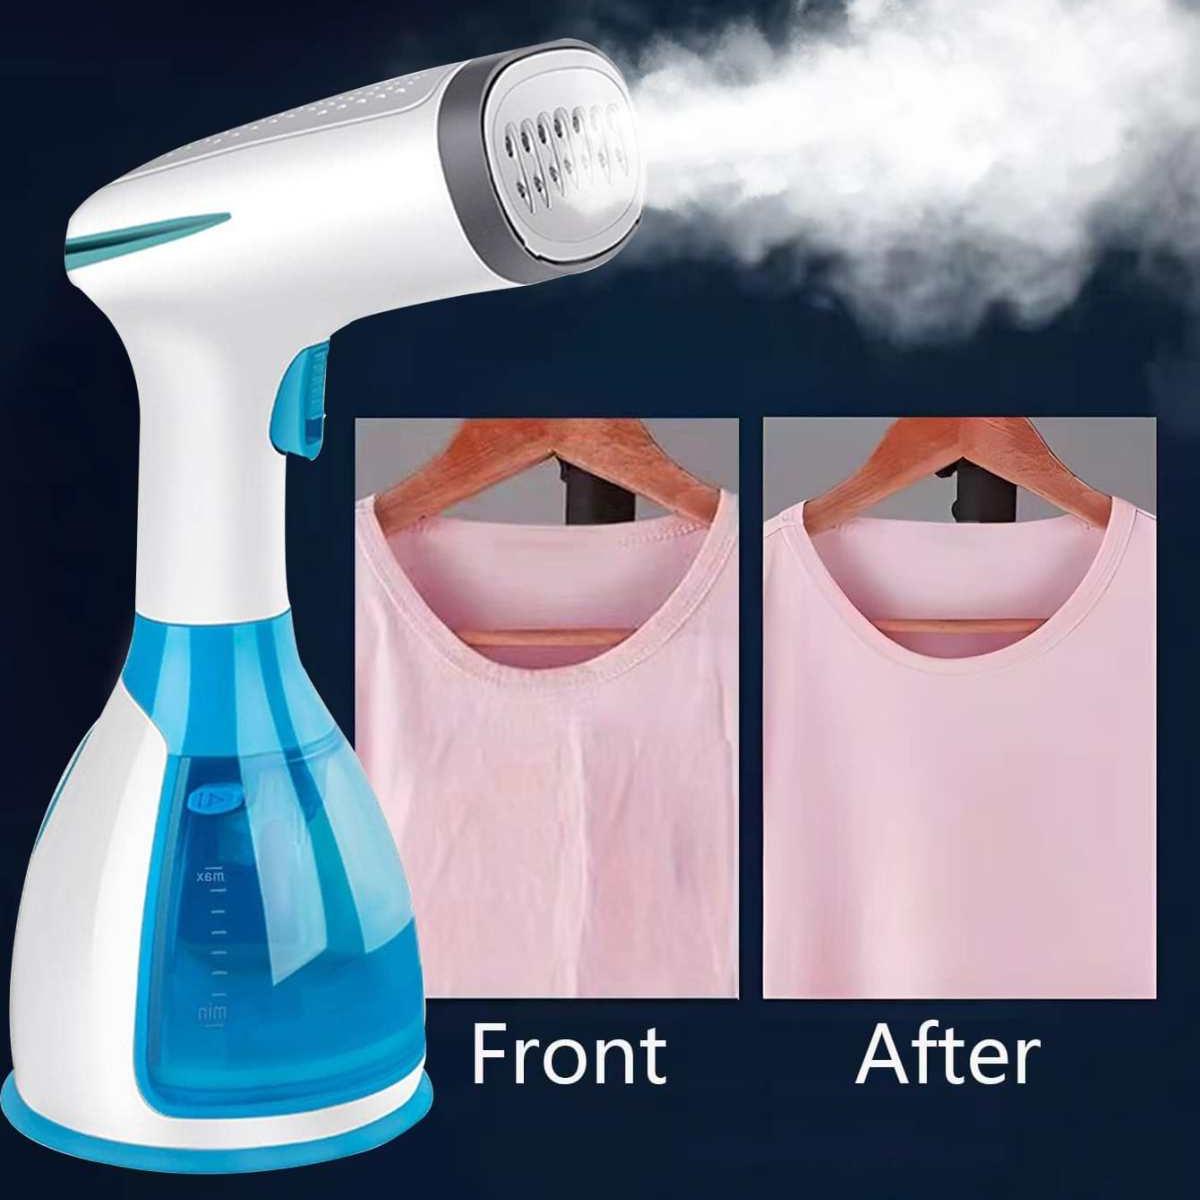 Living family Steamer Iron for Clothes Handheld Garment Steamer 1500W Mini Portable Travel Household Fabric Wrinkle Remover 15s Fast Heat-up